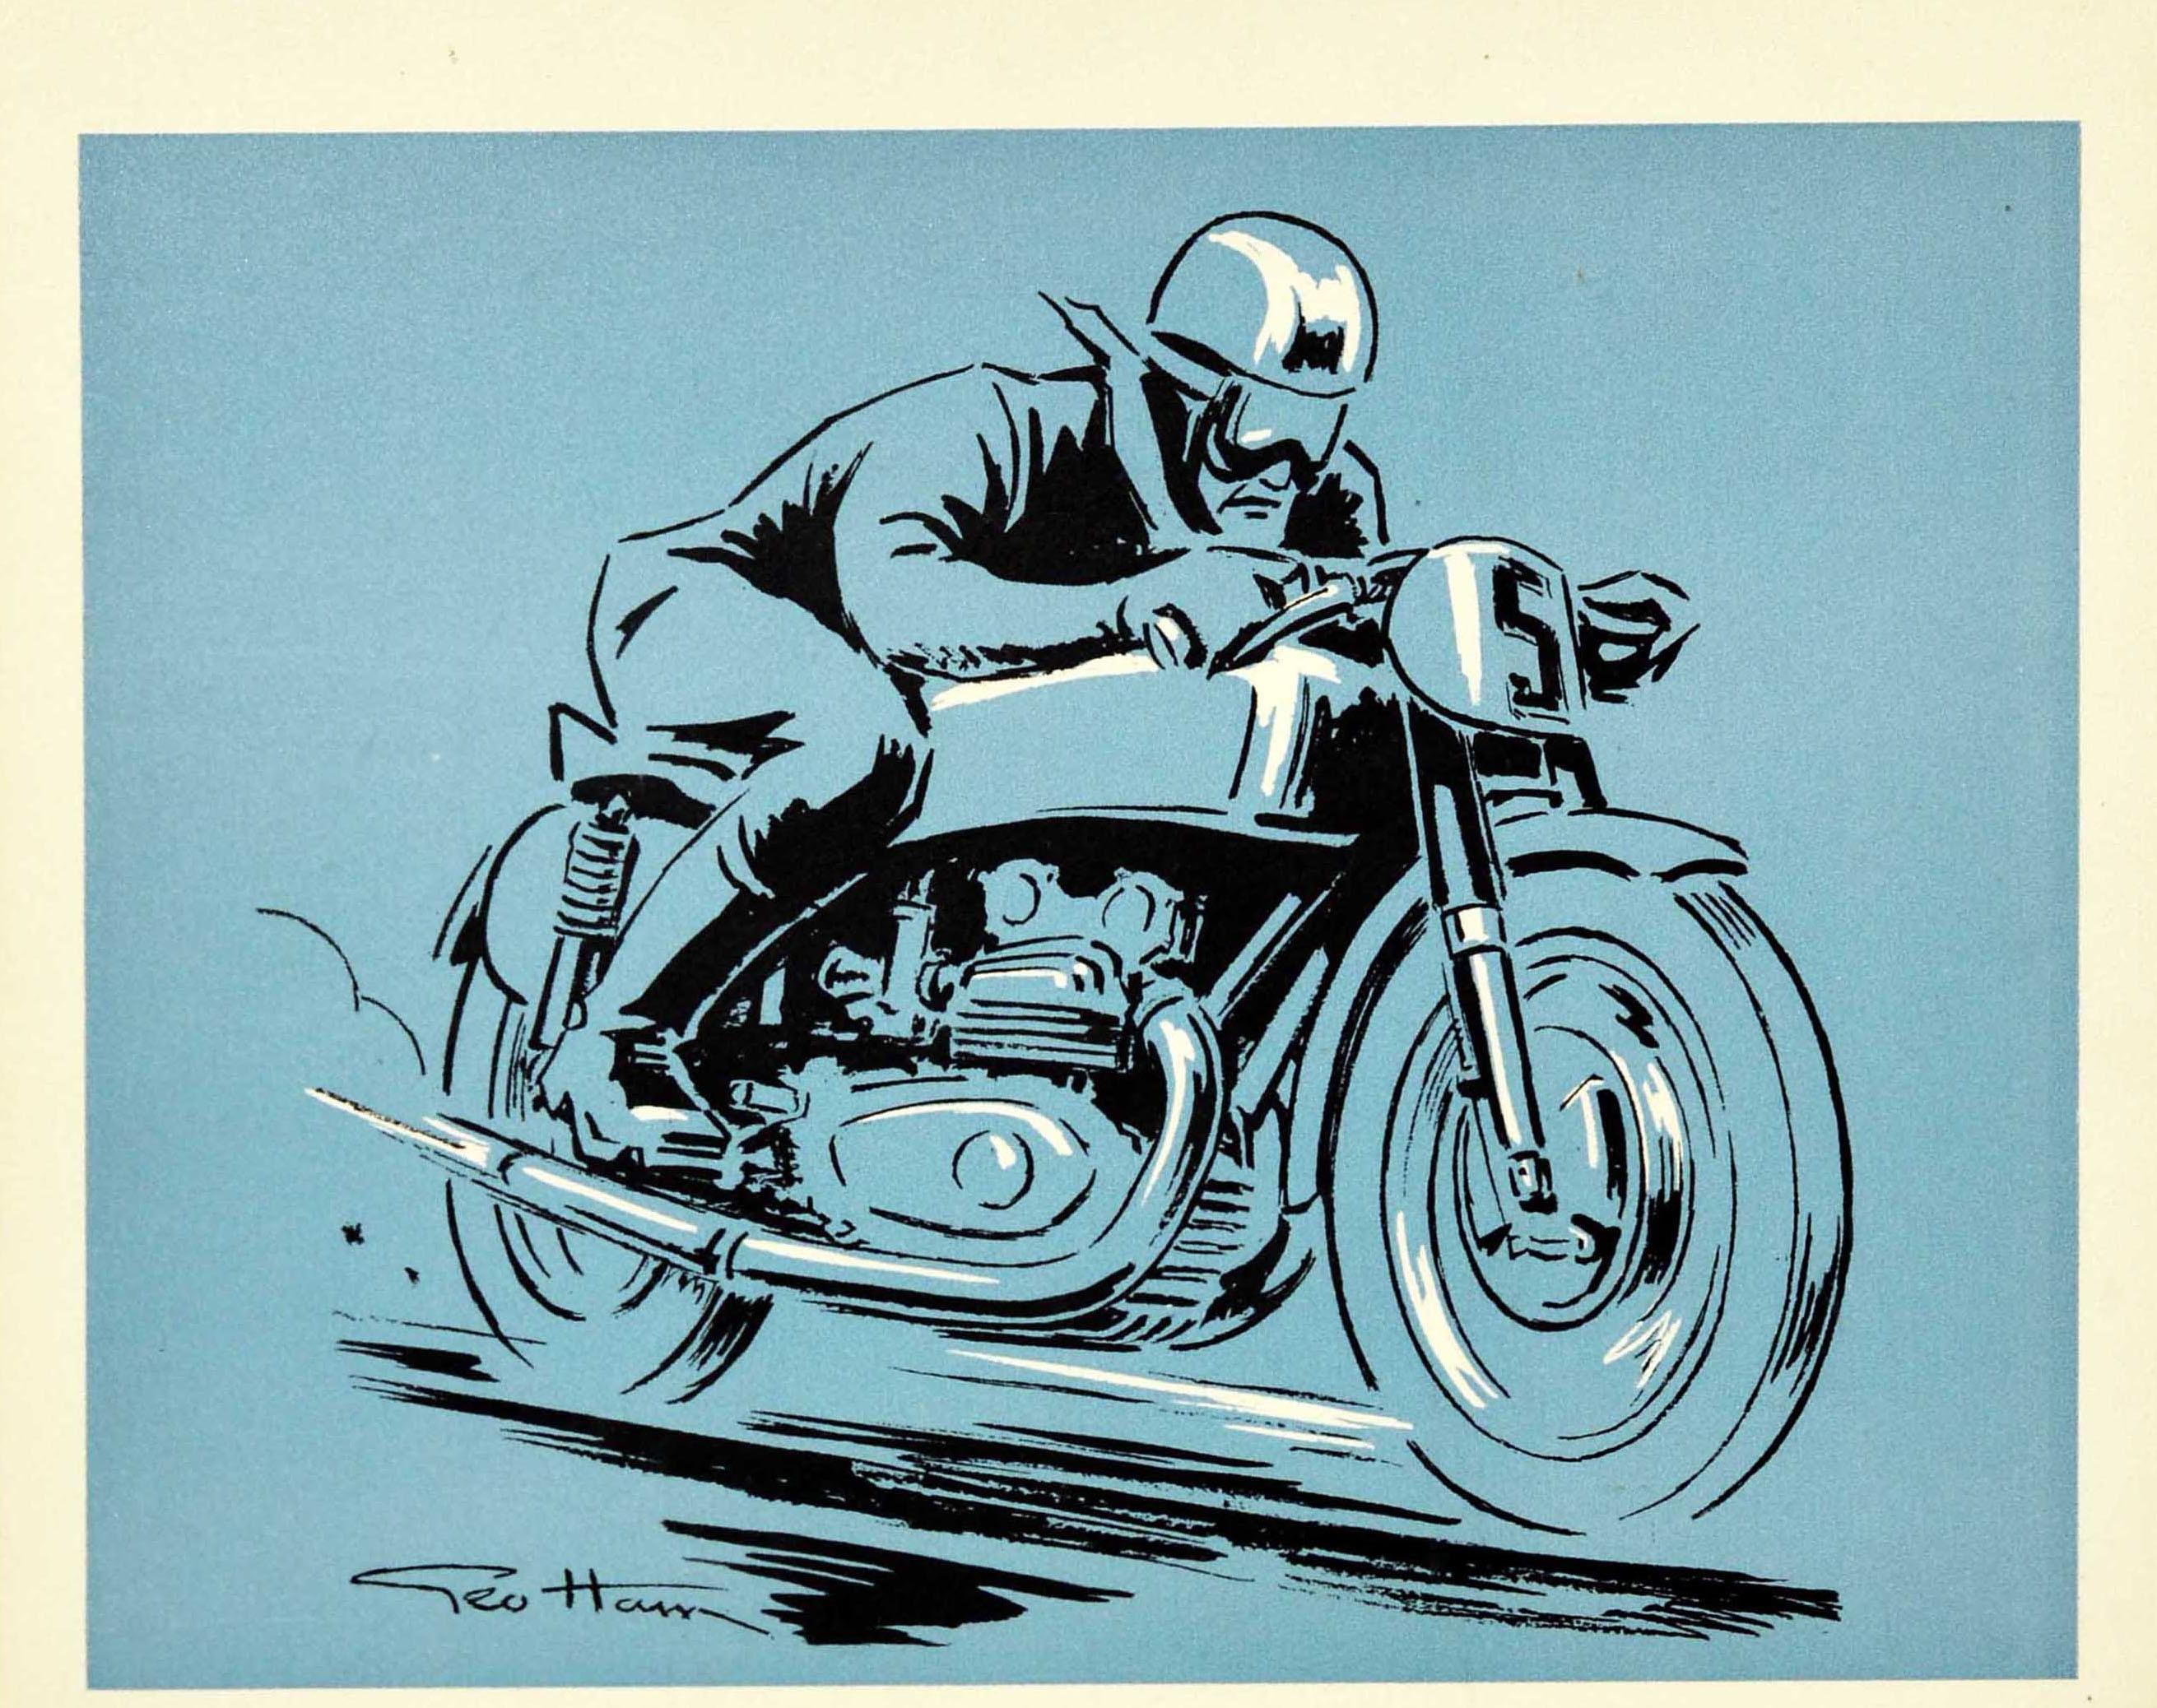 Original vintage motorsport diploma award poster - Motocycle Club de France Diplome Decerne MCF - featuring a dynamic illustration by Geo Ham (Georges Hamel; 1900-1972) depicting a motorcyclist in a helmet and goggles driving a motorbike at speed